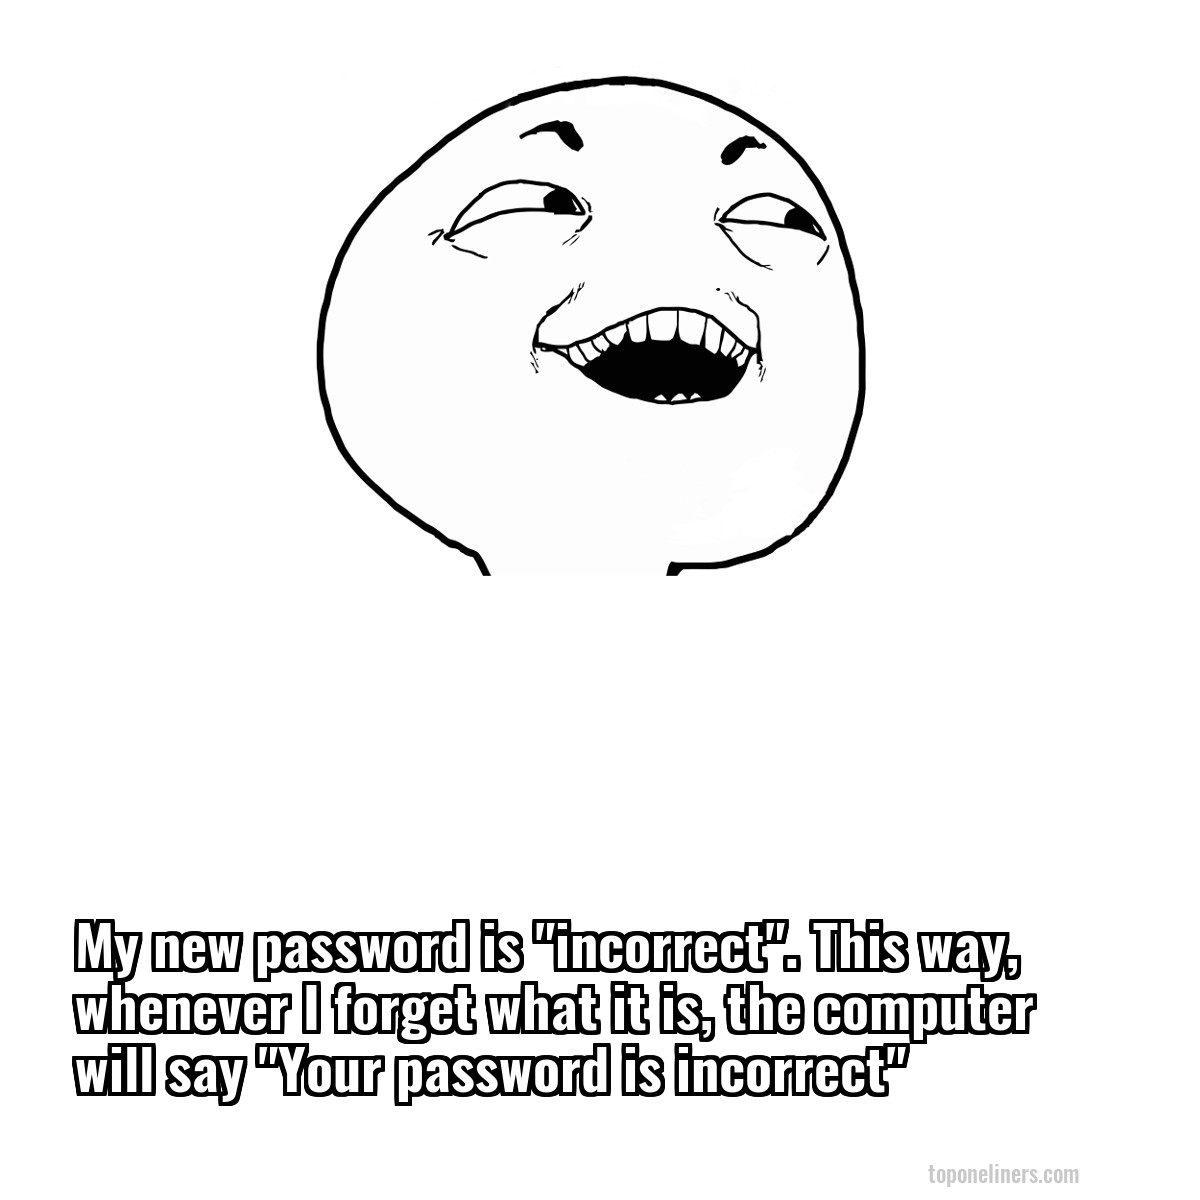 My new password is "incorrect". This way, whenever I forget what it is, the computer will say "Your password is incorrect"